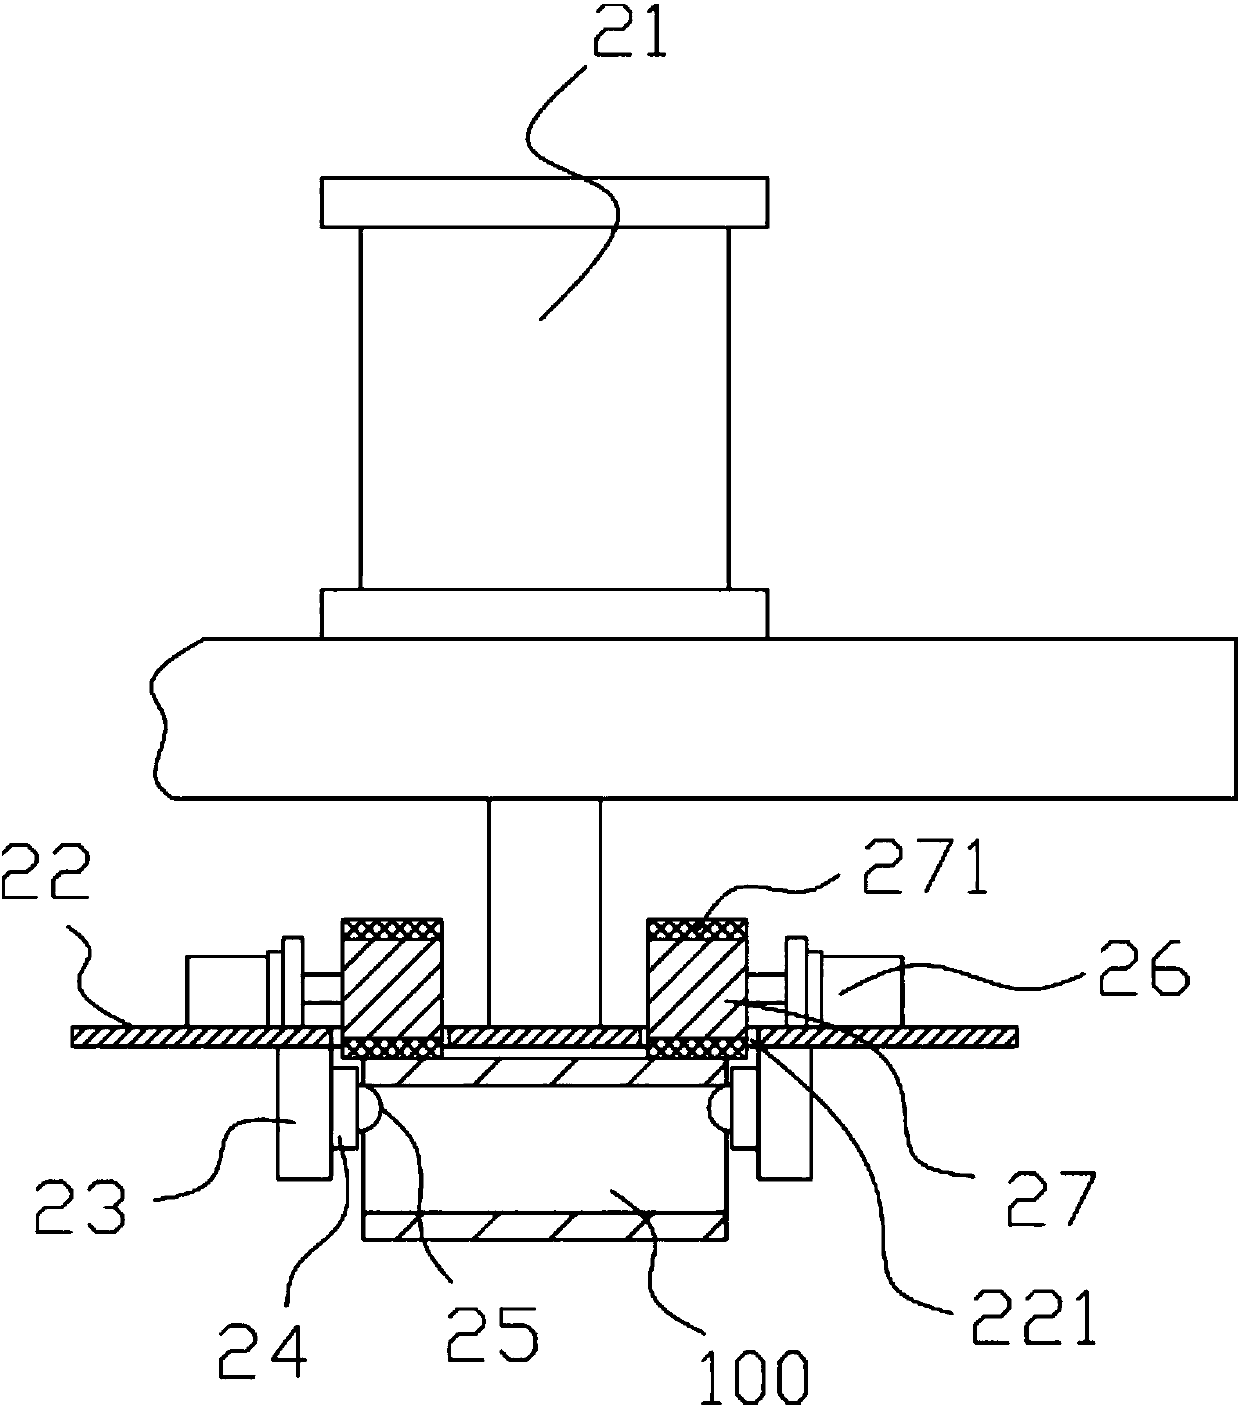 An automatic oil immersion mechanism for cylinder sleeve hardware